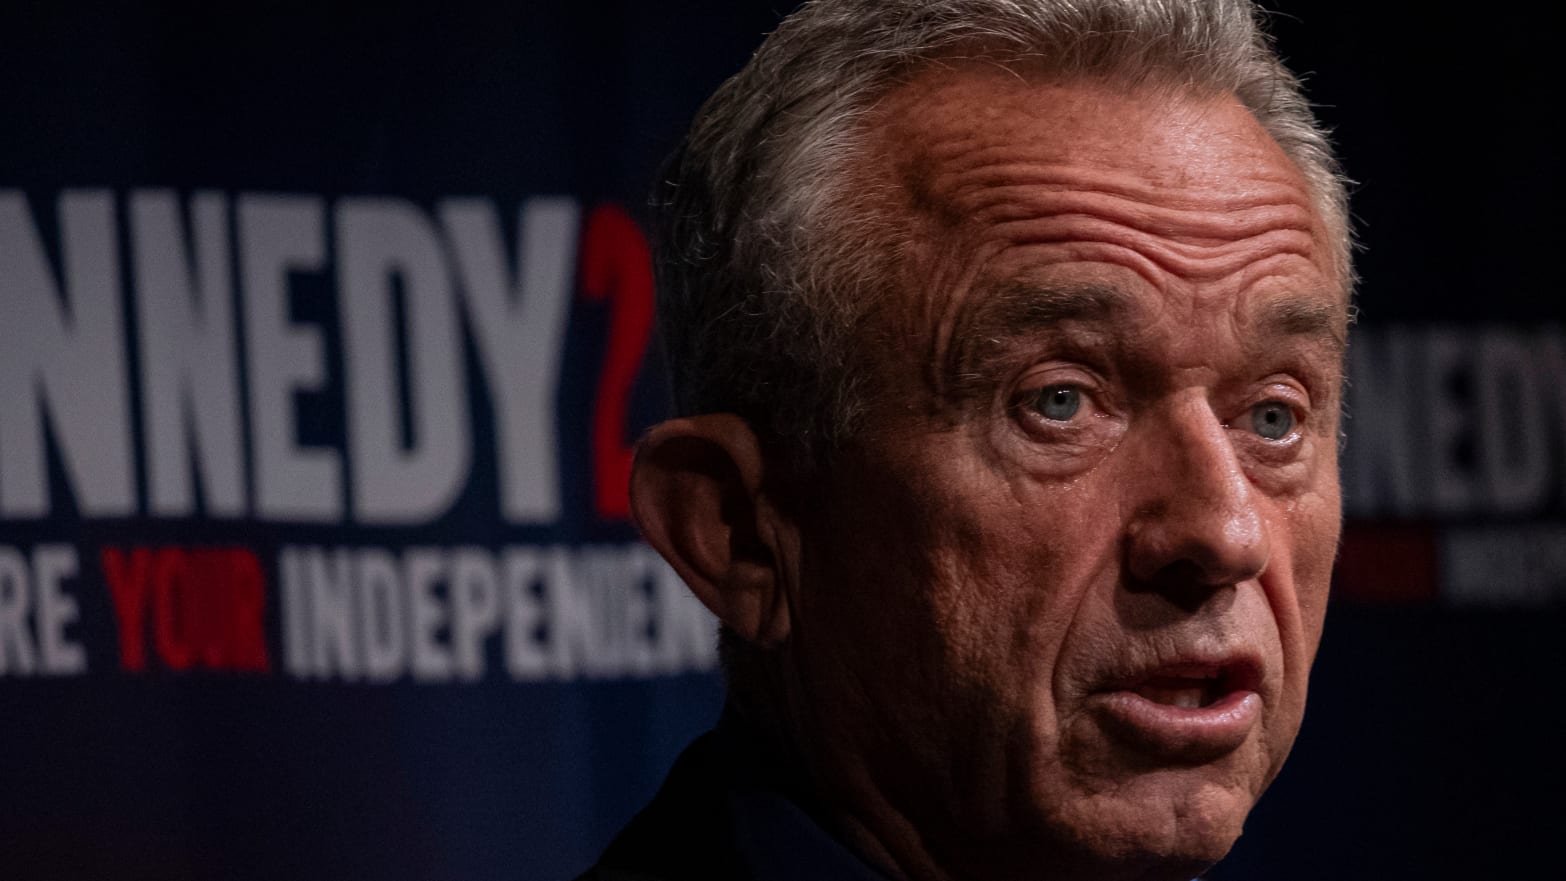 Independent presidential candidate Robert F. Kennedy Jr. speaks during a campaign event.